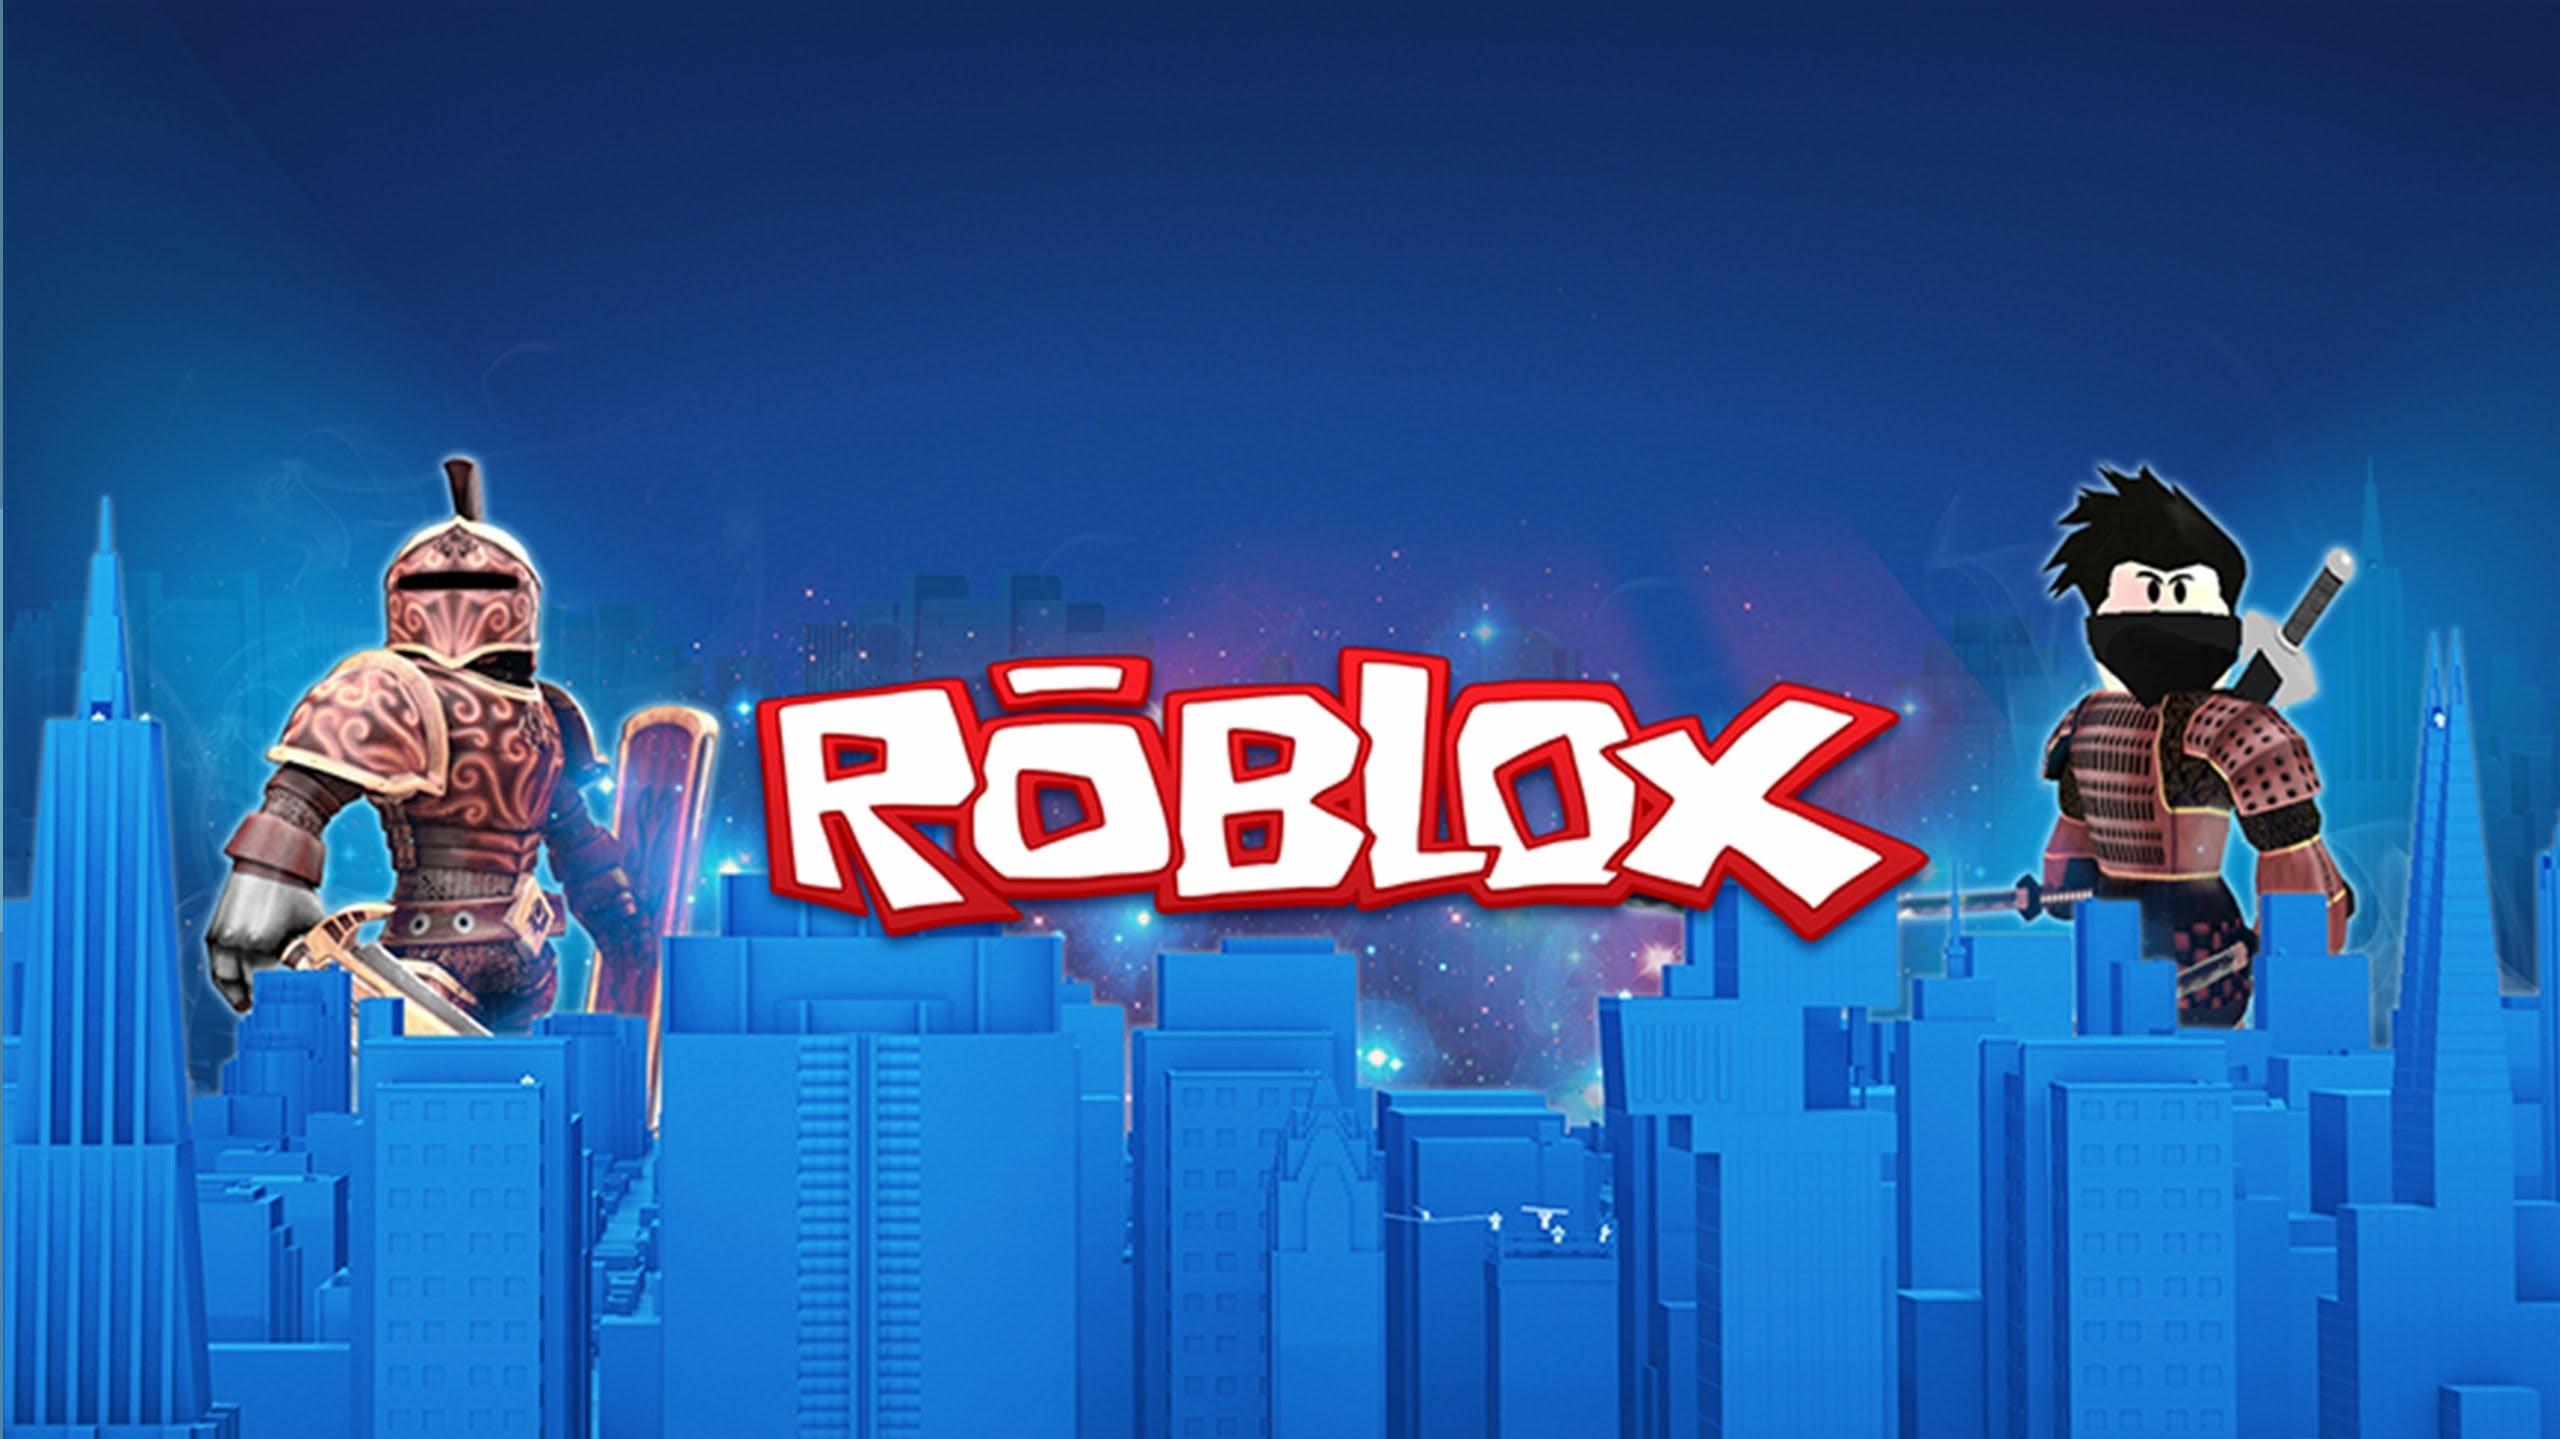 Roblox What Parents Need To Know About This Popular Gaming Platform